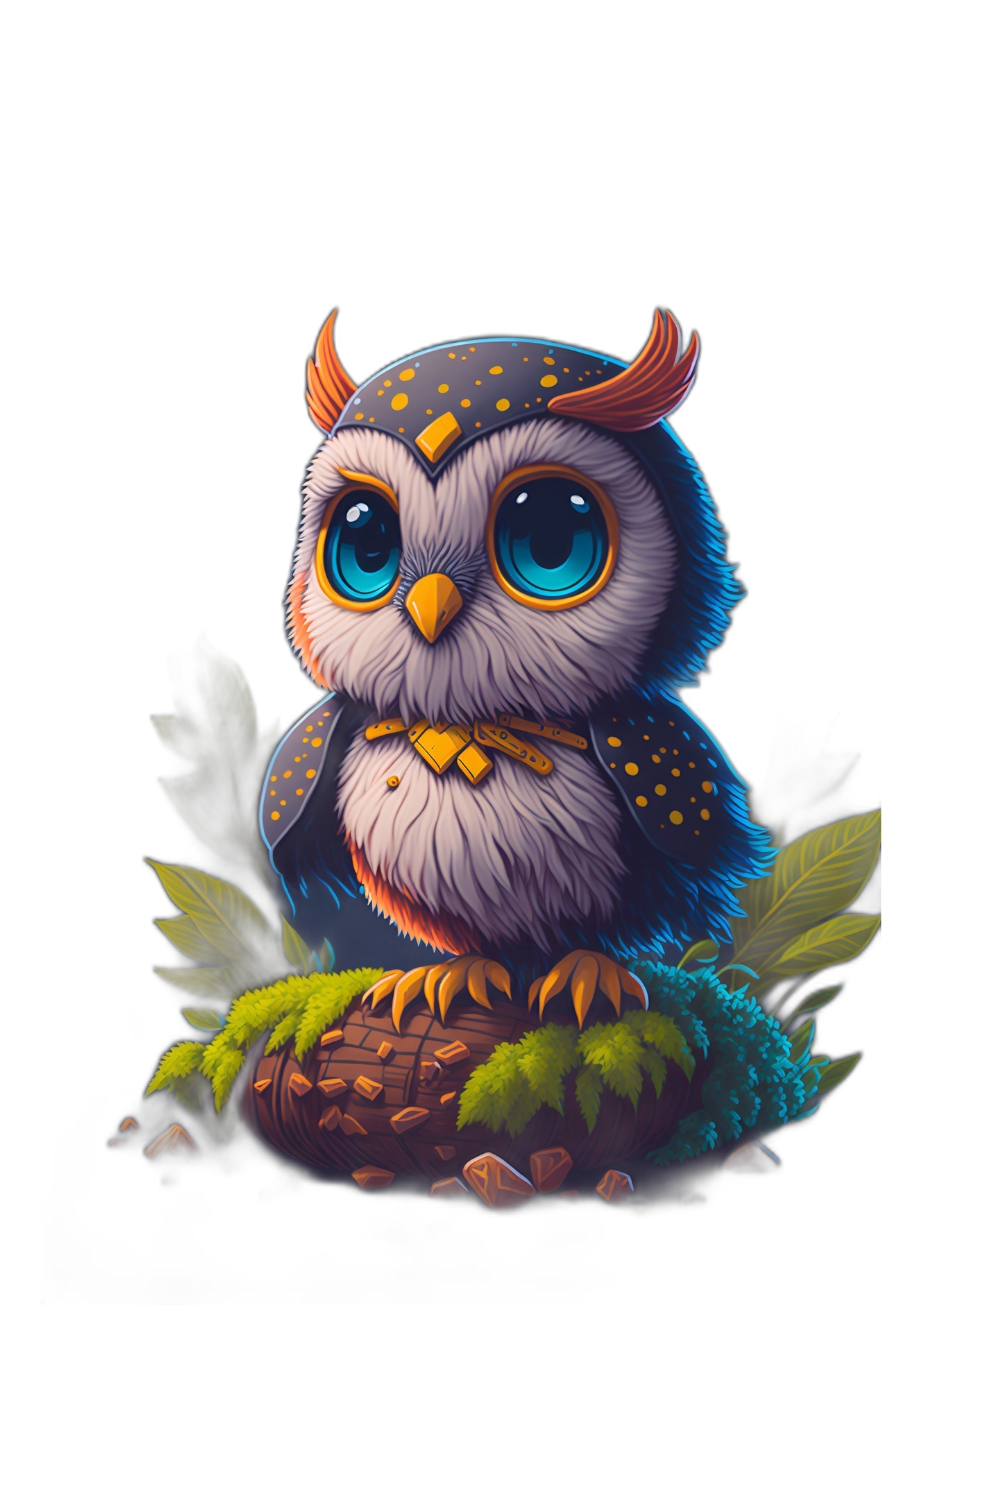 Cute owl 4k quality design for T-Shirts , logos , illustrations etc pinterest preview image.